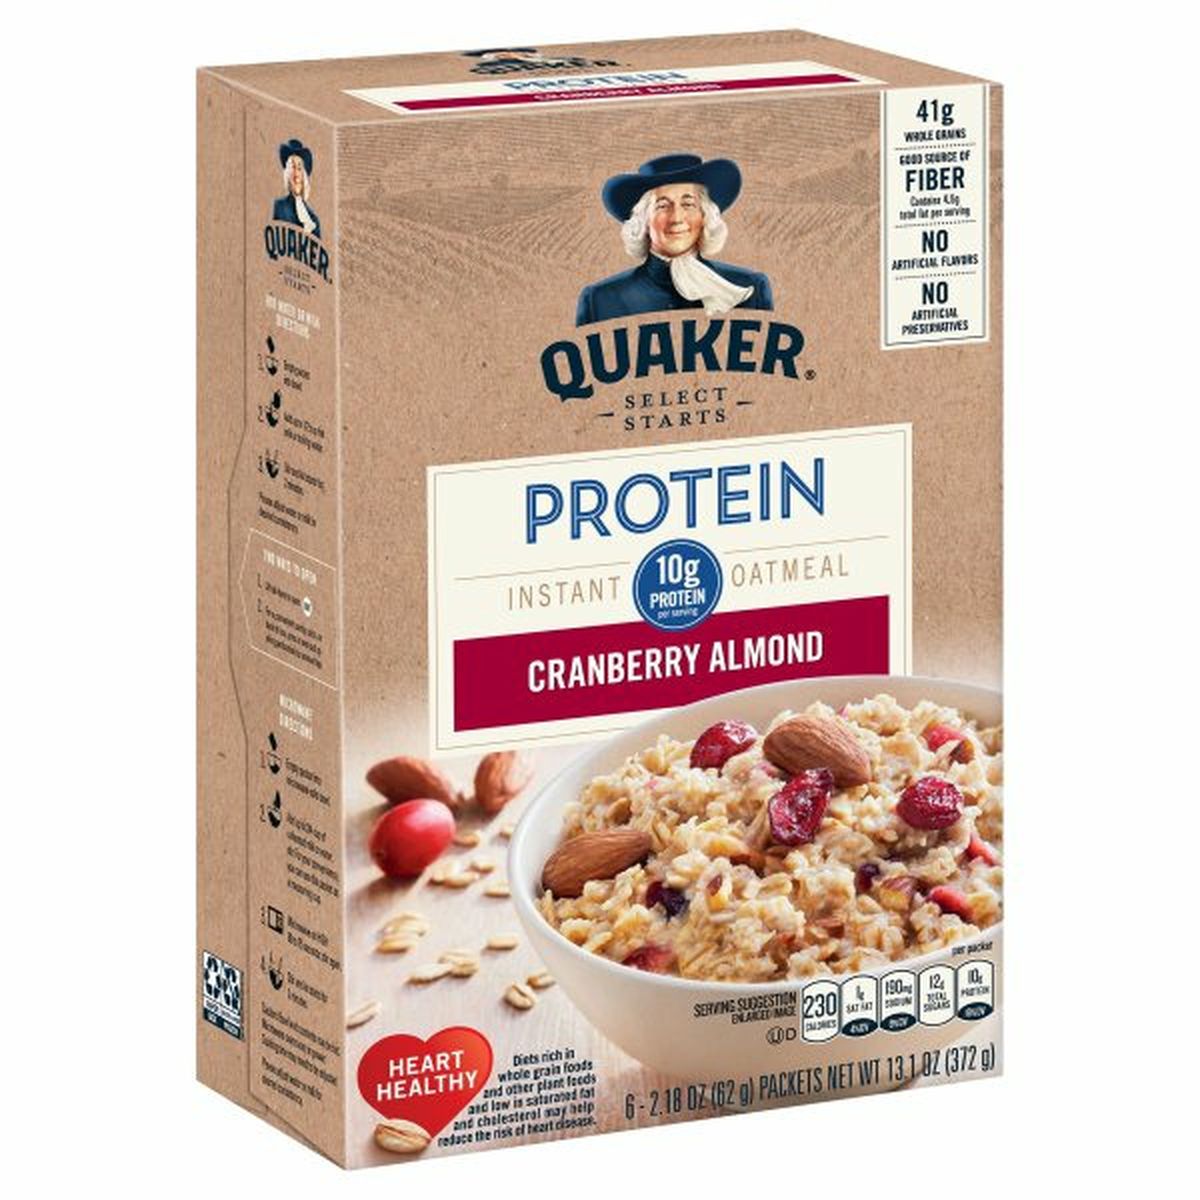 Calories in Quaker Instant Oatmeal Instant Oatmeal, Protein, Cranberry Almond